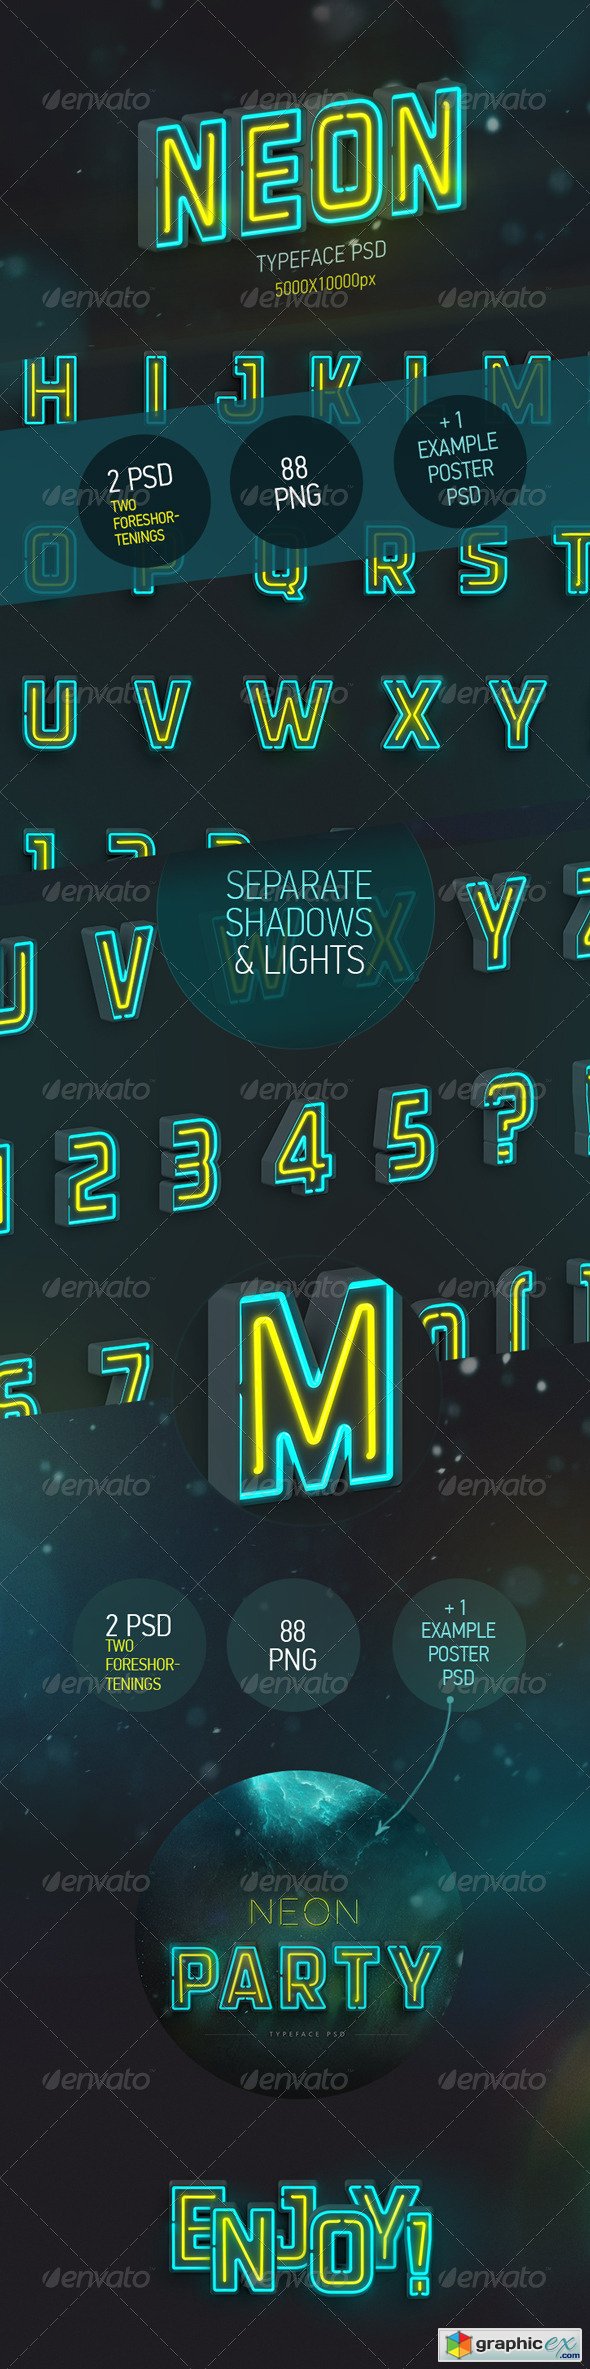 Neon Typeface (3 PSD, 88 PNG)